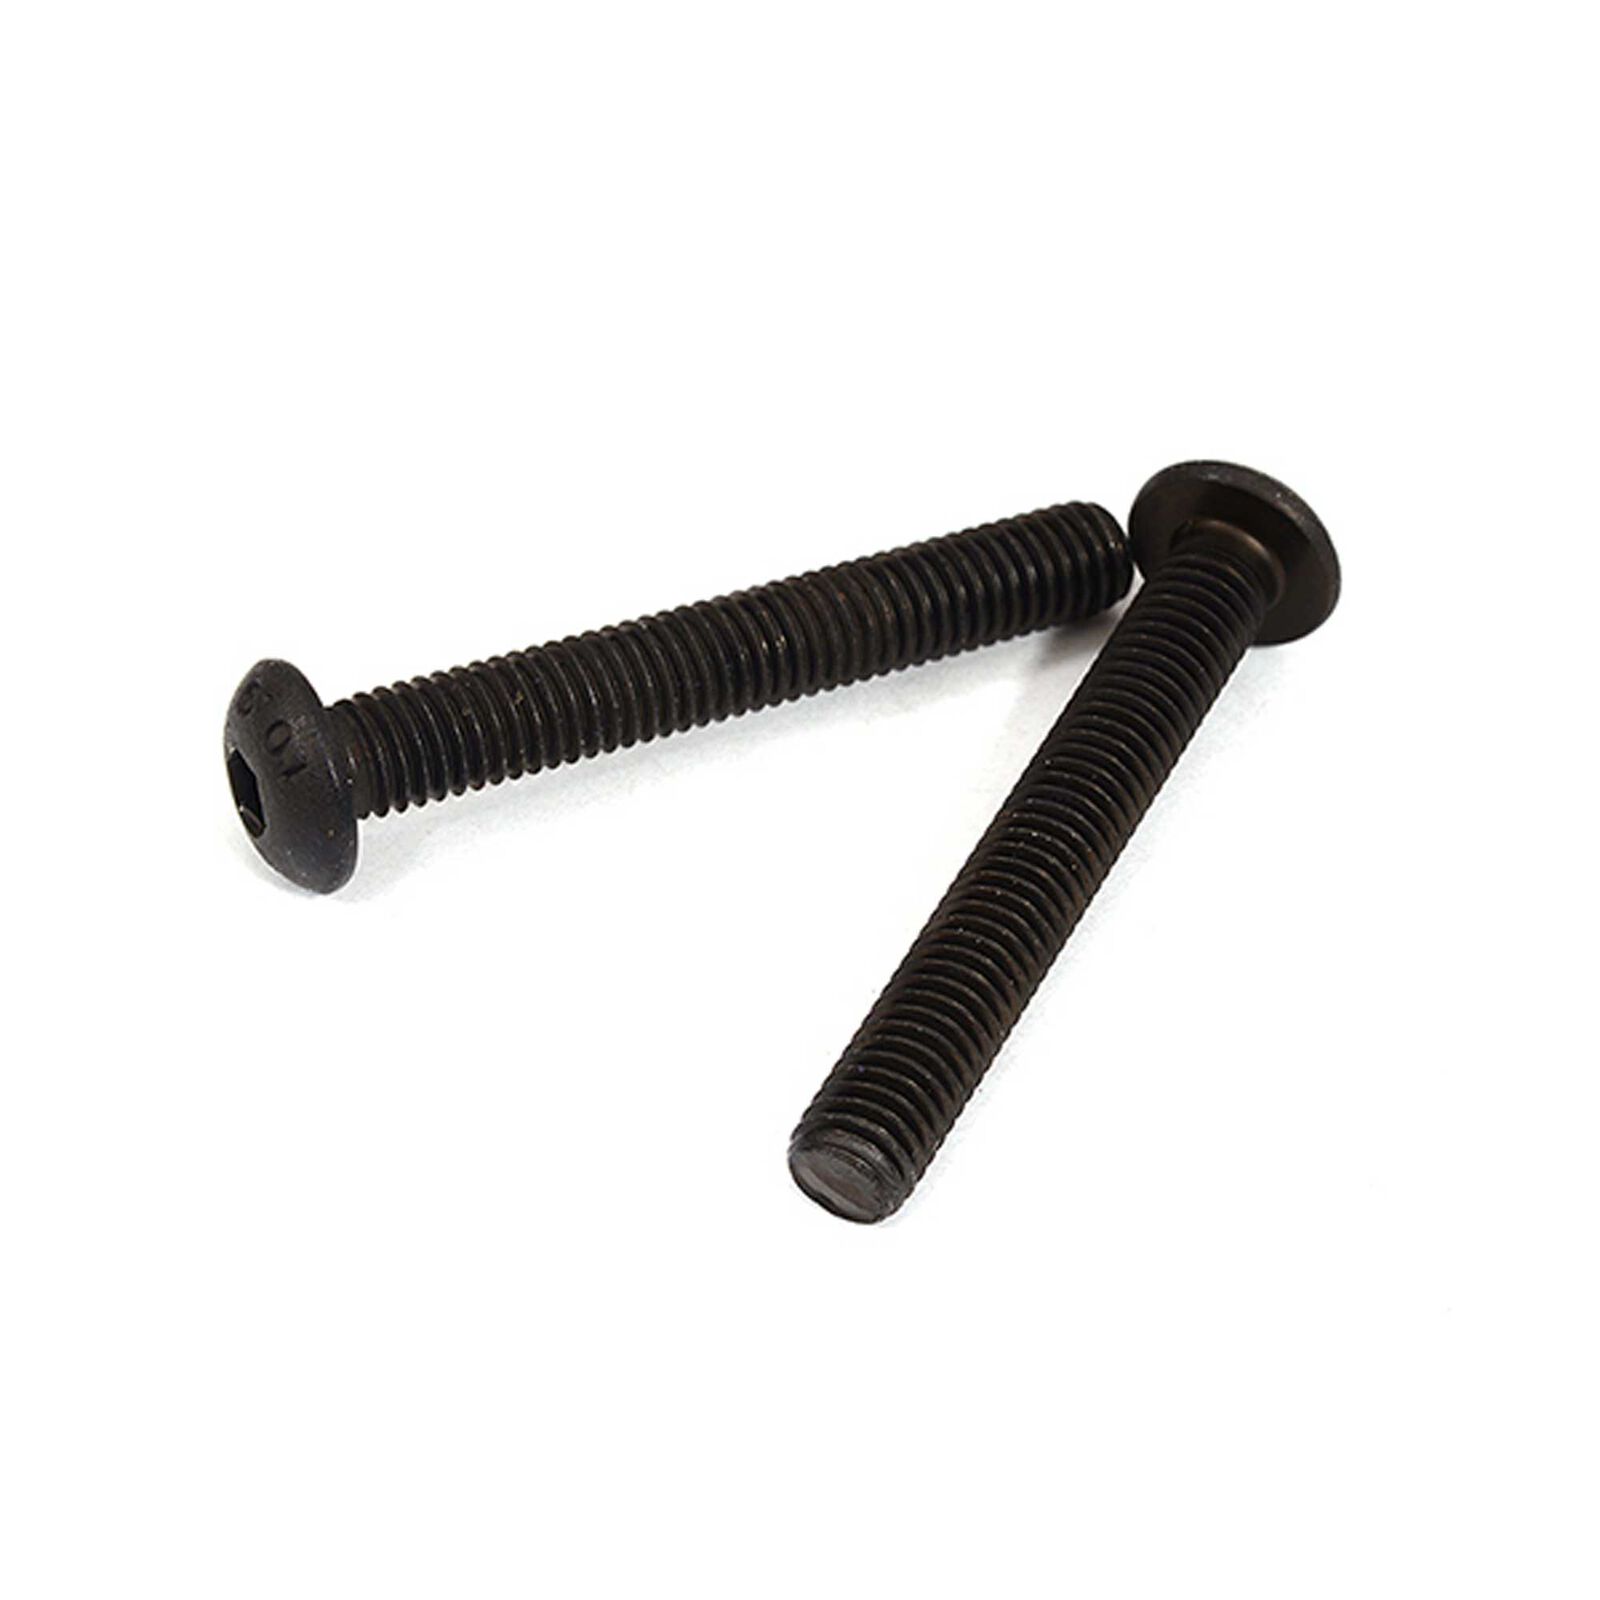 Replacement Screws M5x35mm (2) for C28832 & C28833